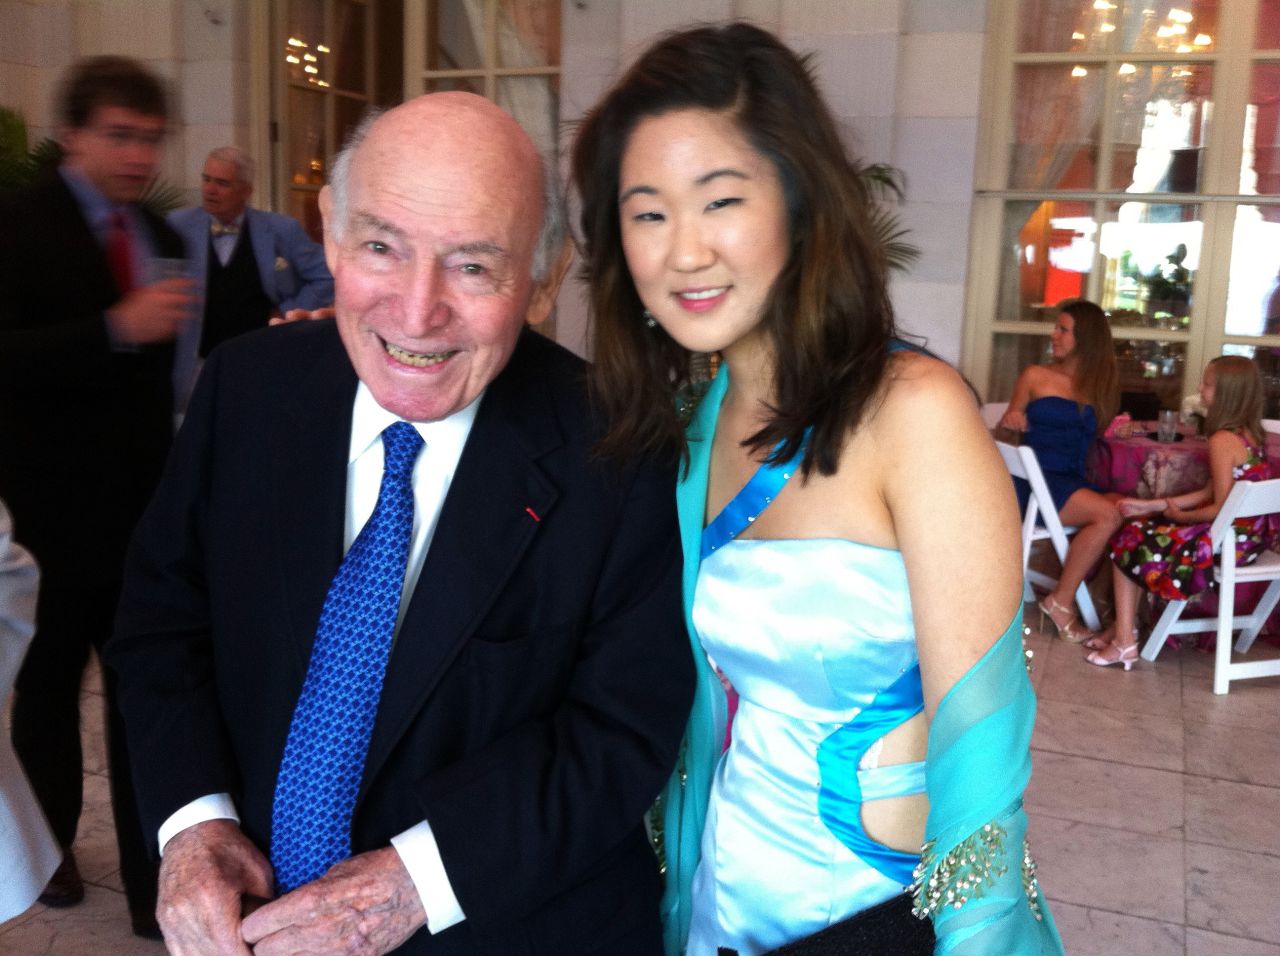 She's played one of jazz's biggest events, the Newport Jazz Festival, more than once. She poses here with festival founder George Wein.